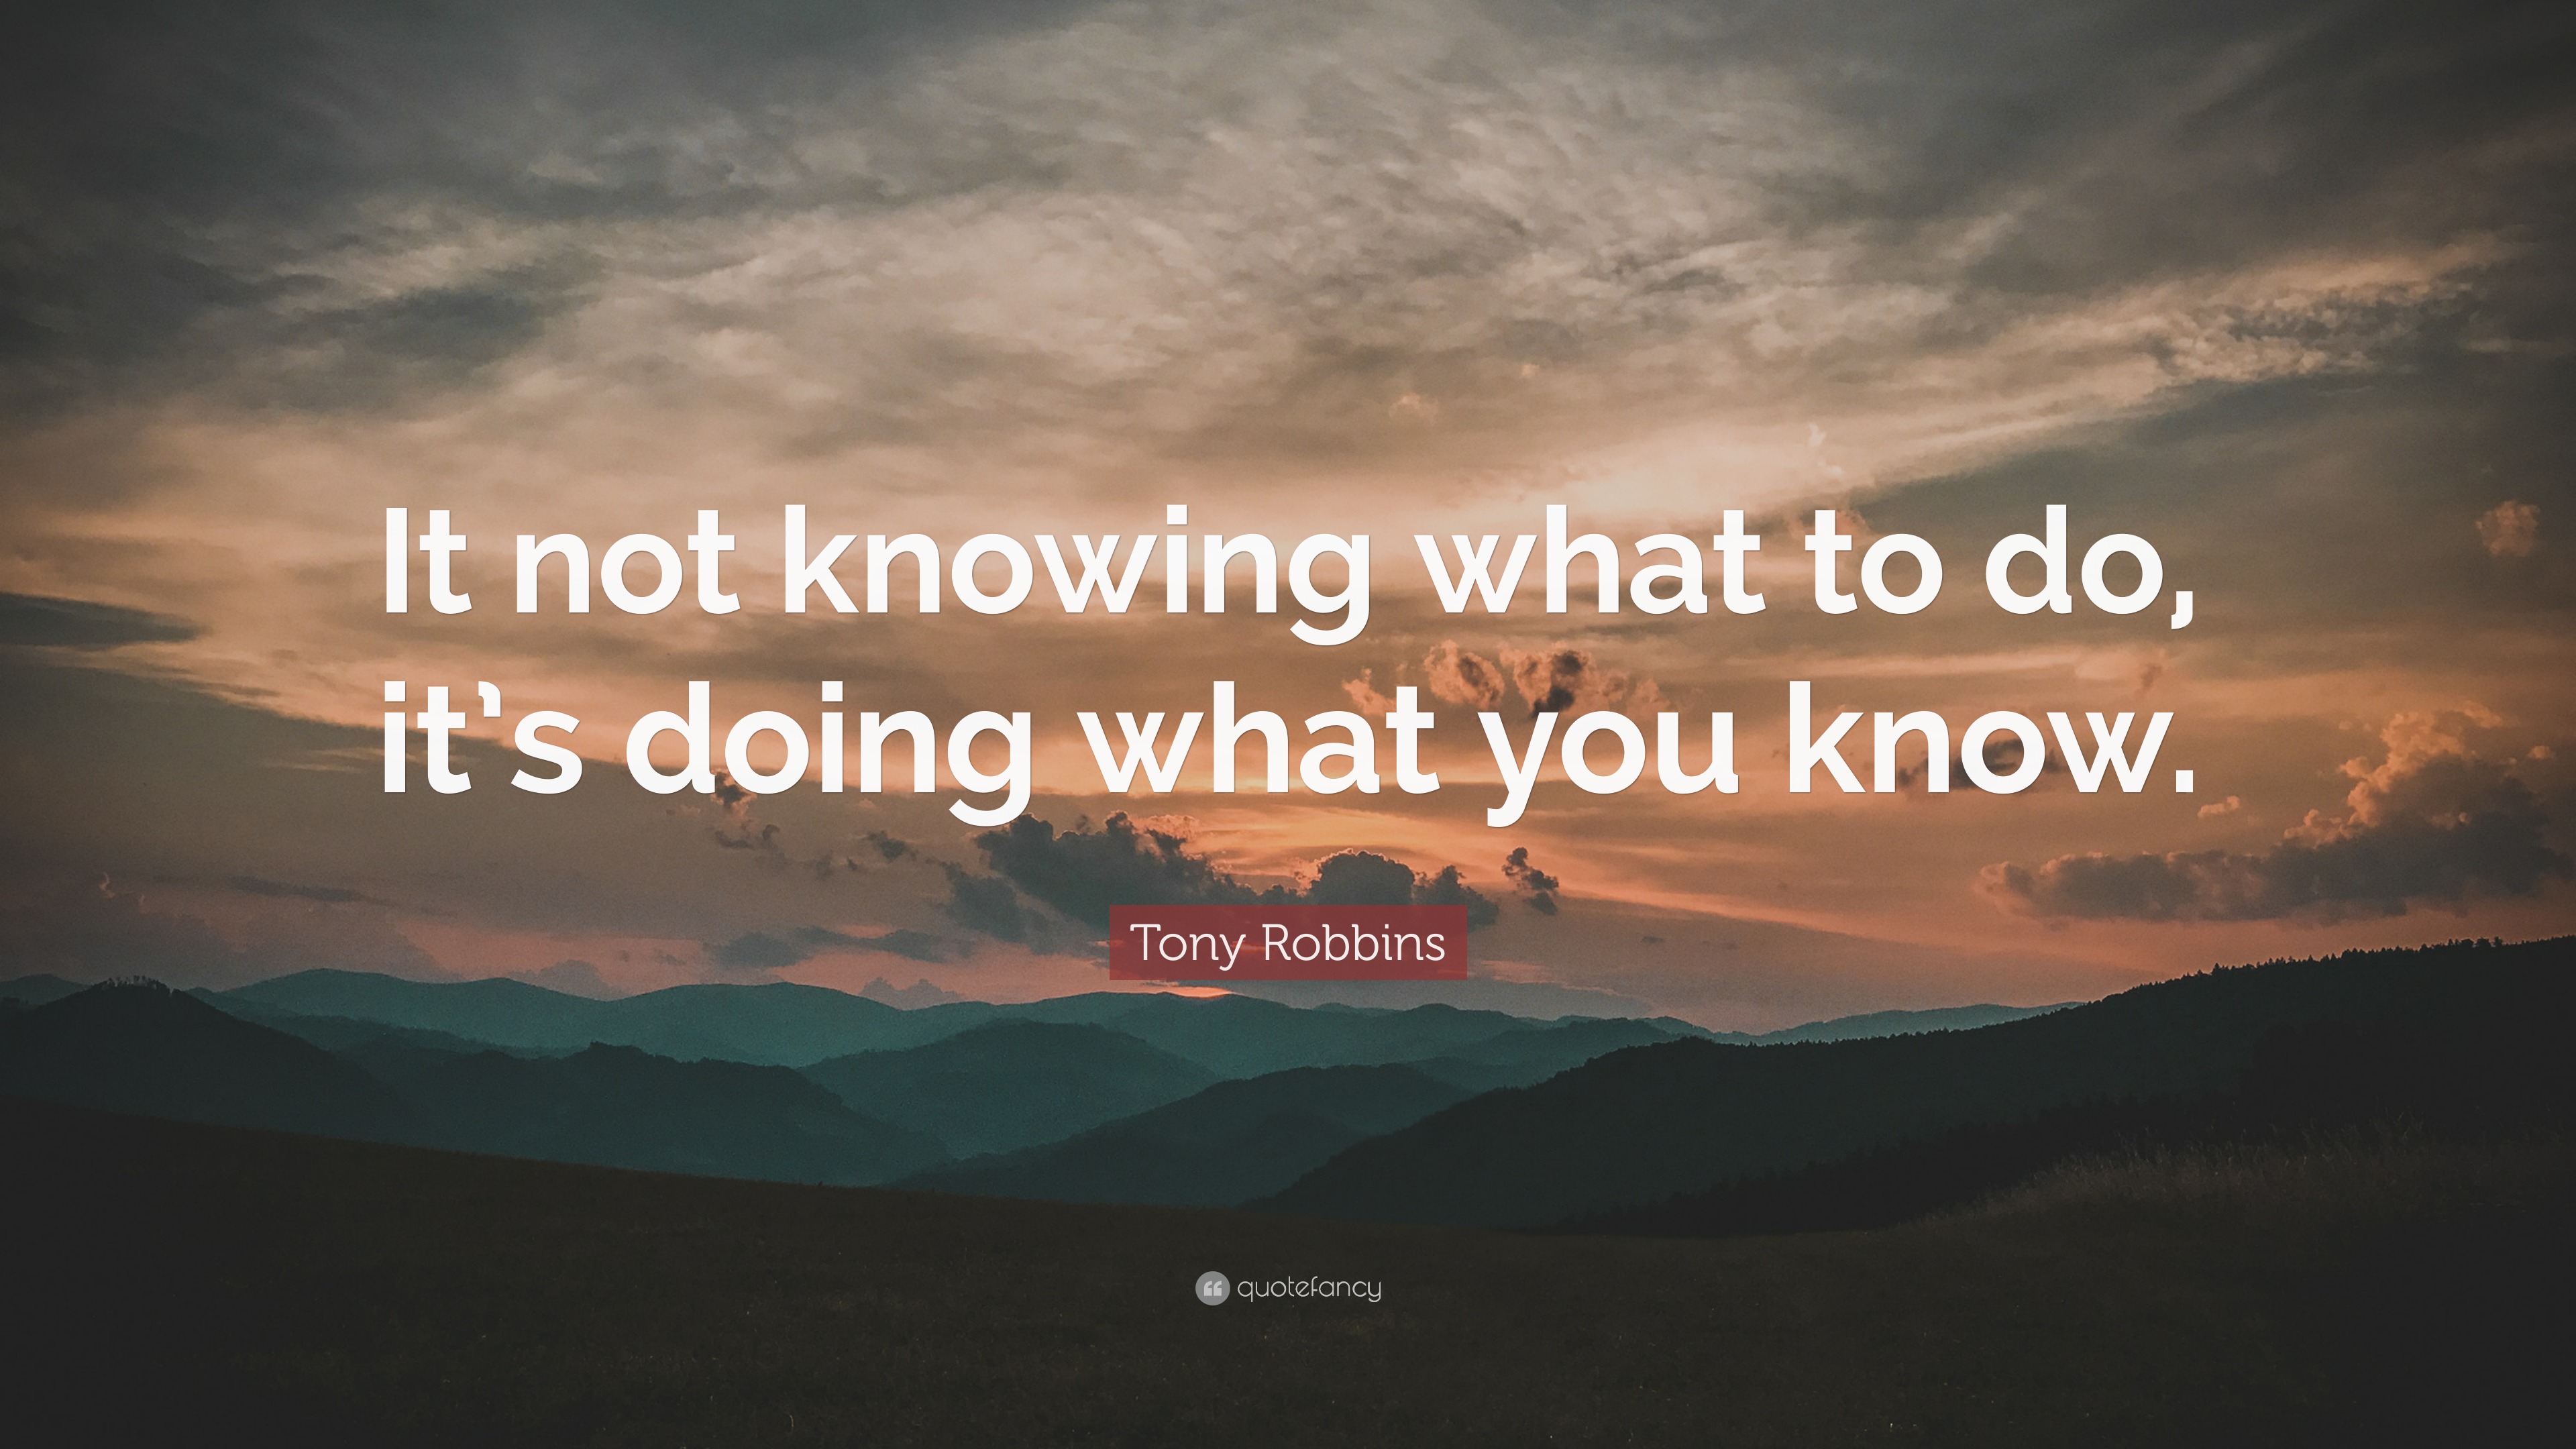 Tony Robbins Quote: “It not knowing what to do, it’s doing what you know.”